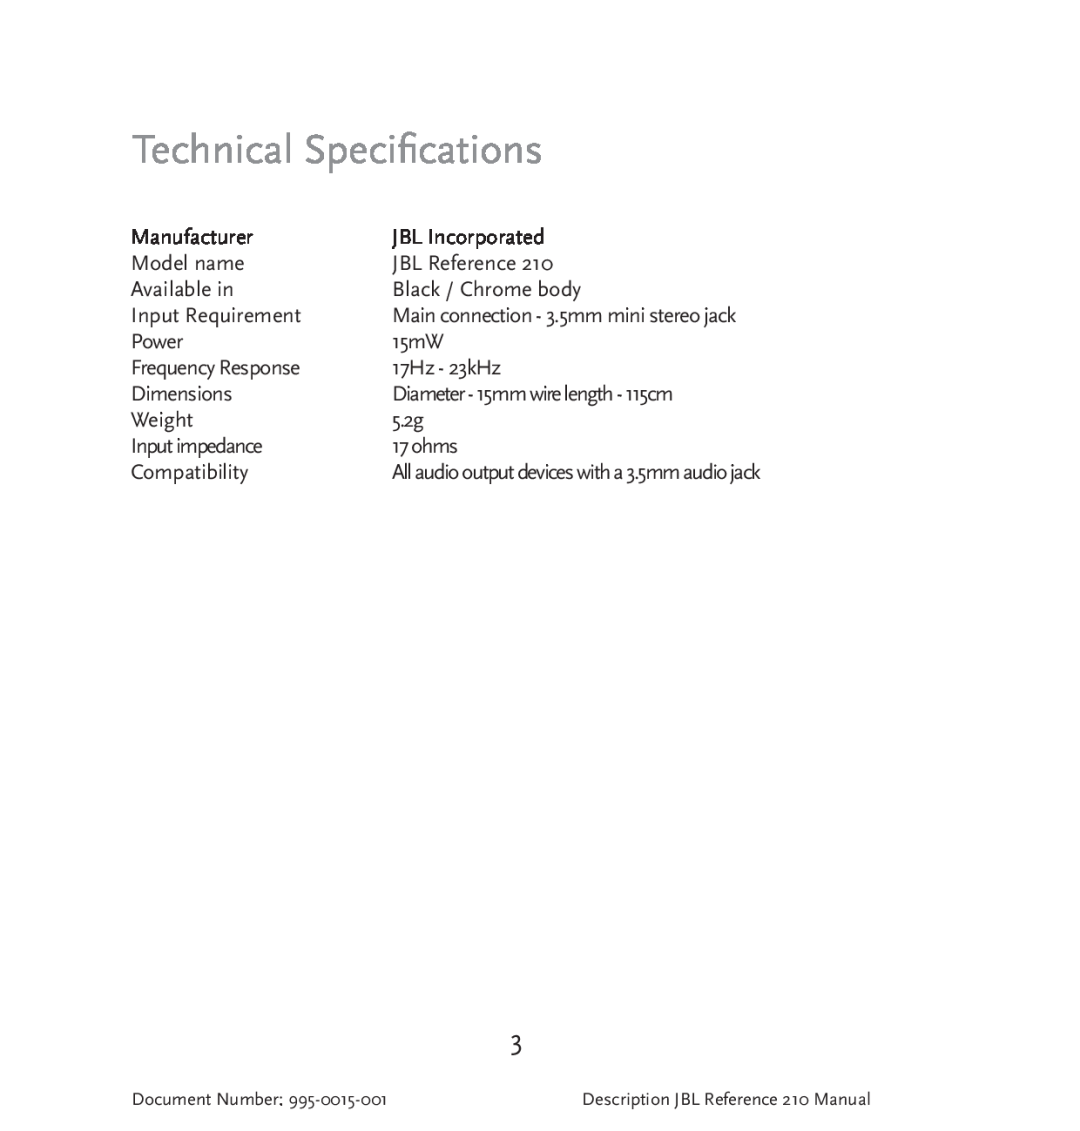 JBL 210 manual Technical Specifications 